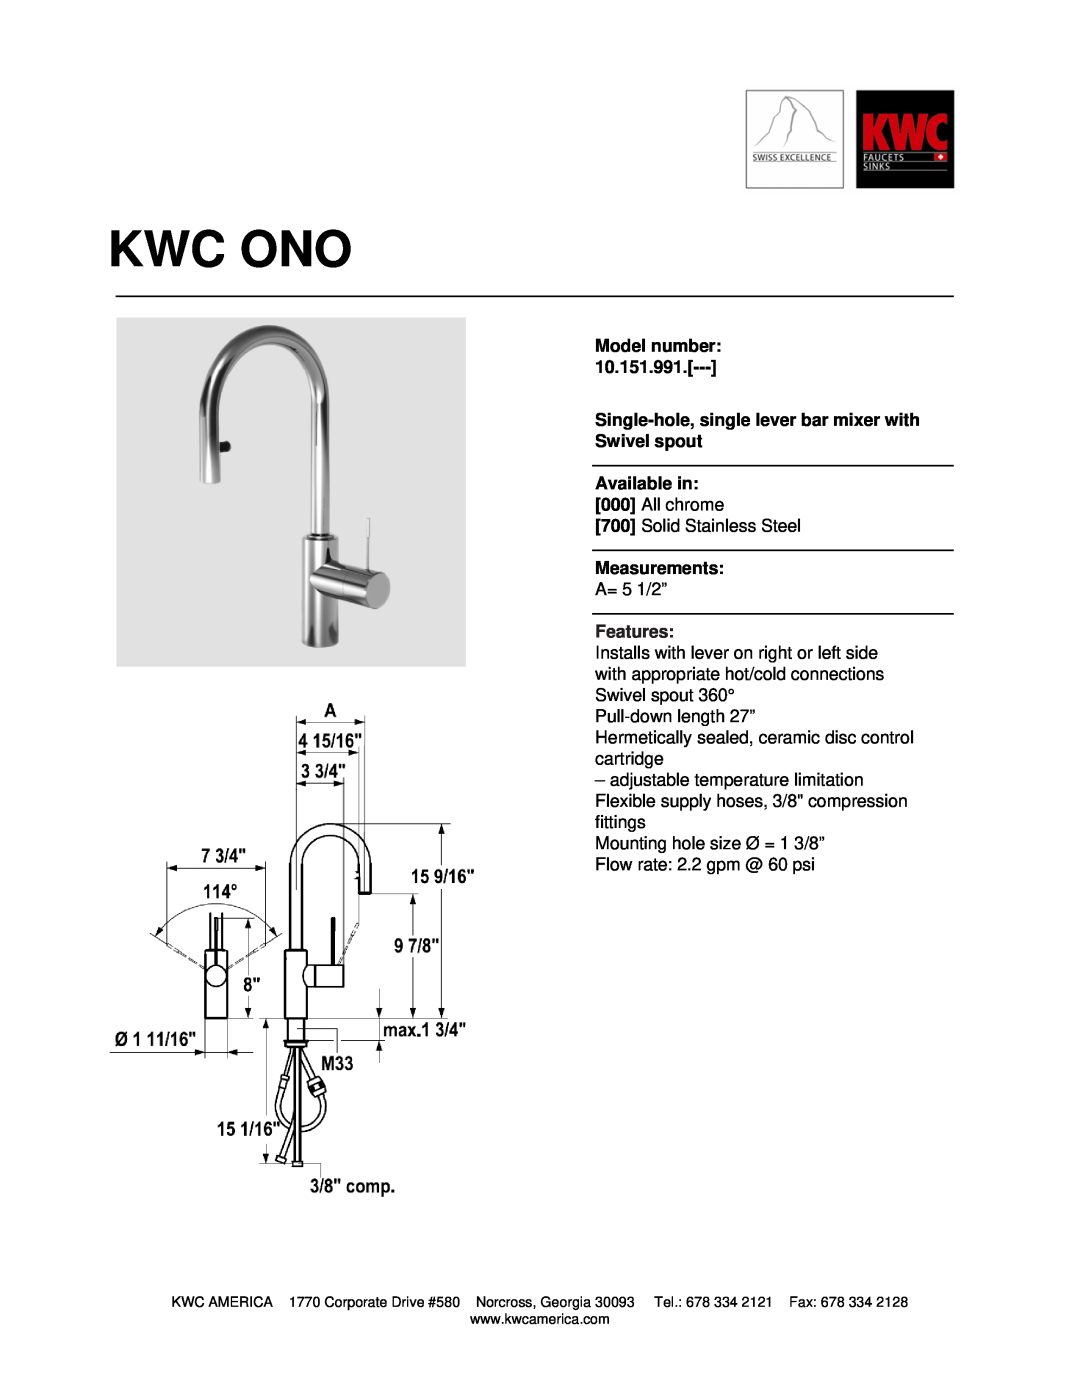 KWC 10.151.991 manual Kwc Ono, Model number, Single-hole,single lever bar mixer with, Swivel spout Available in, Features 